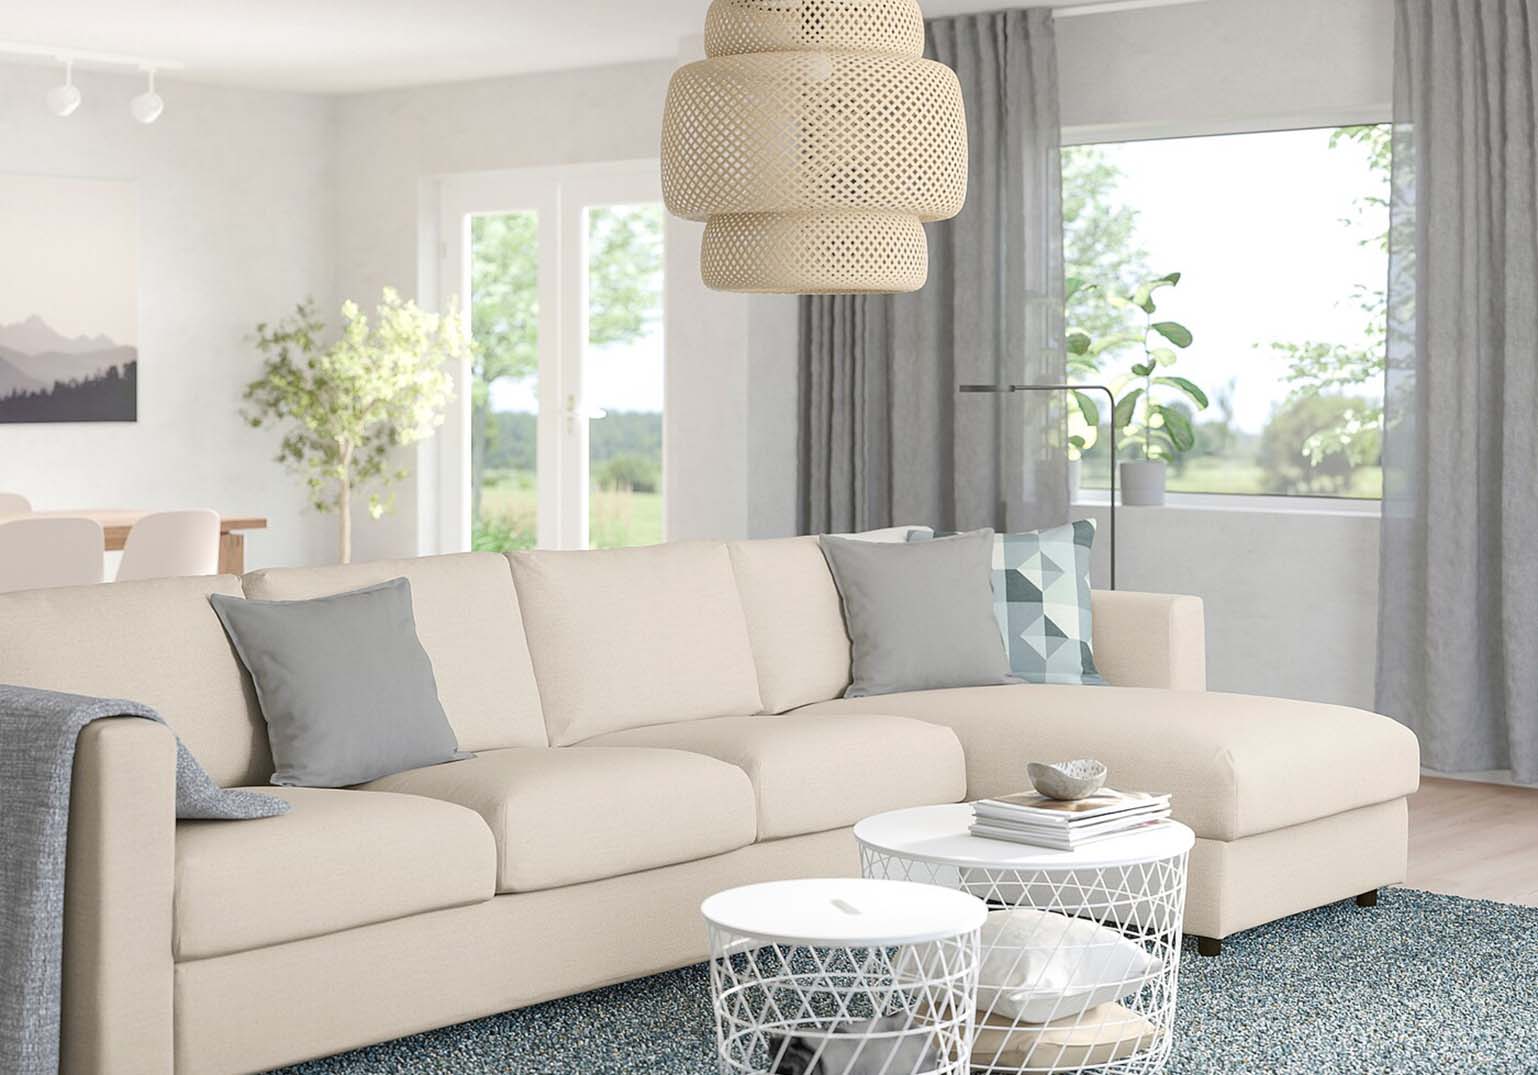 Transform Your Space with IKEA’s Versatile Sofa Collection